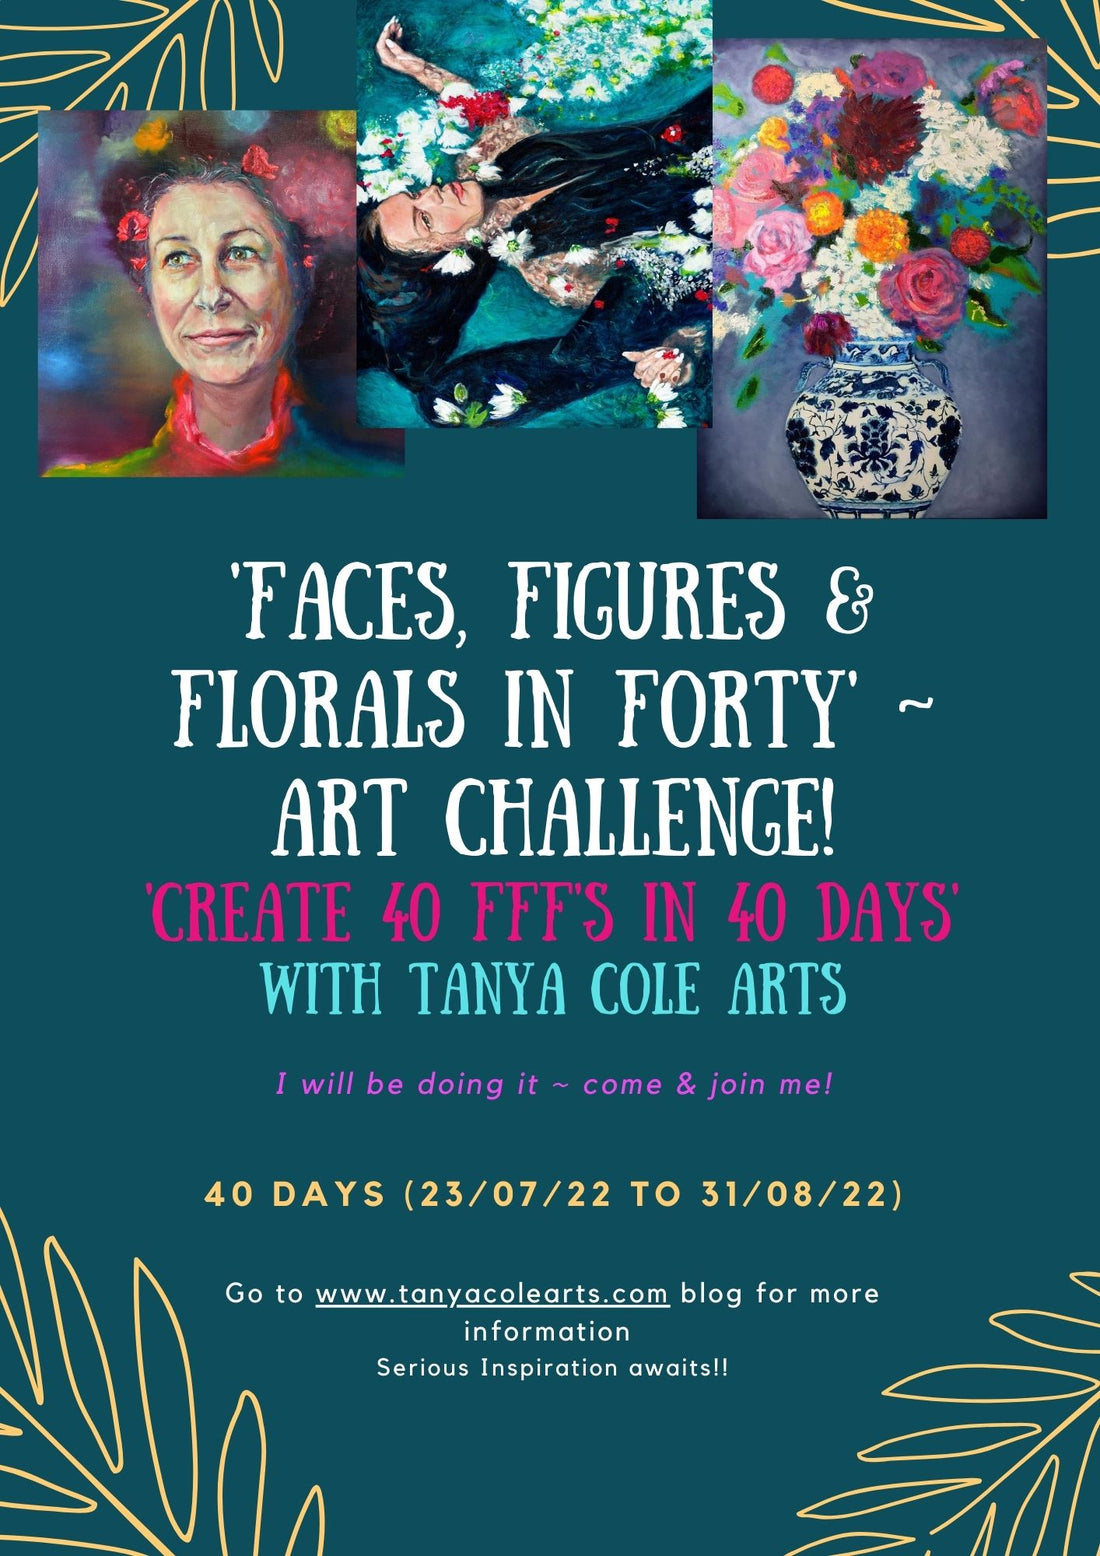 'Faces, Figures & Florals in Forty' Art Challenge ~ come join me!